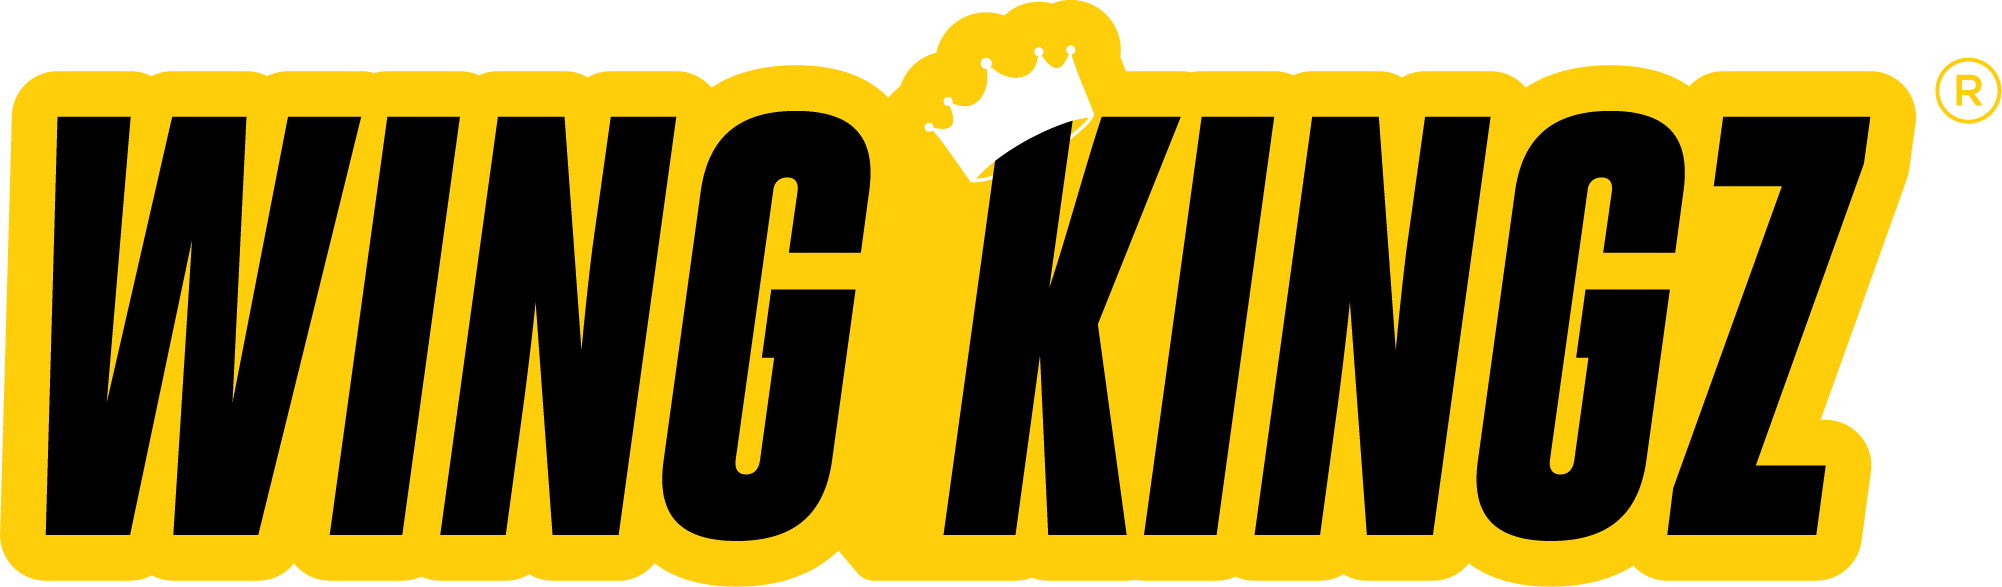 The Wing Kingz Franchise